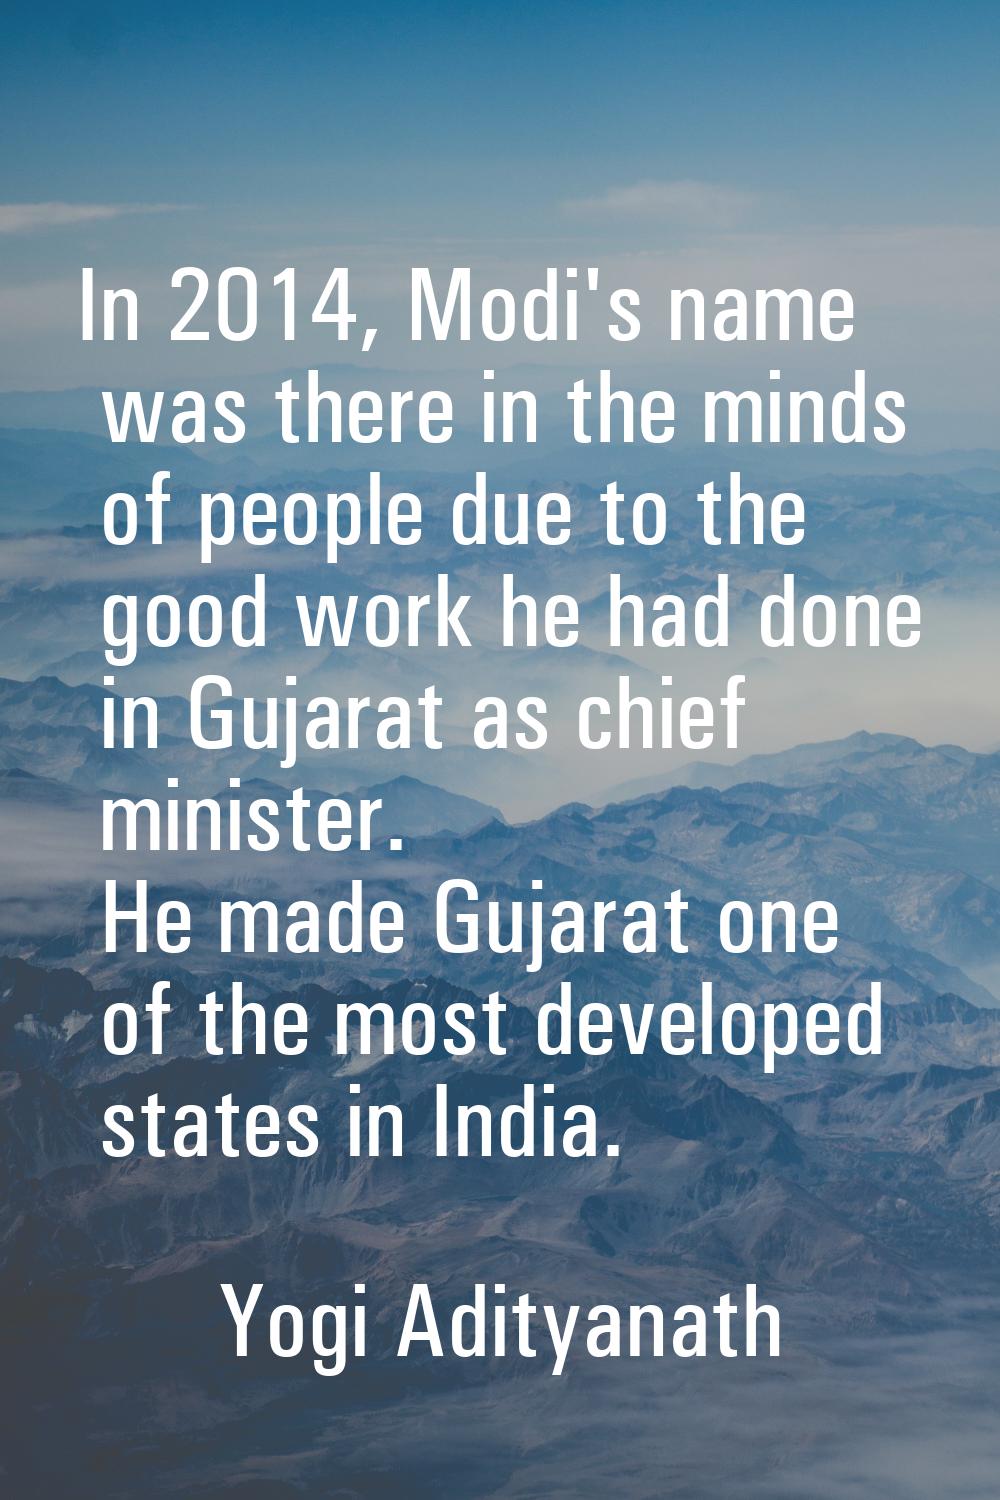 In 2014, Modi's name was there in the minds of people due to the good work he had done in Gujarat a